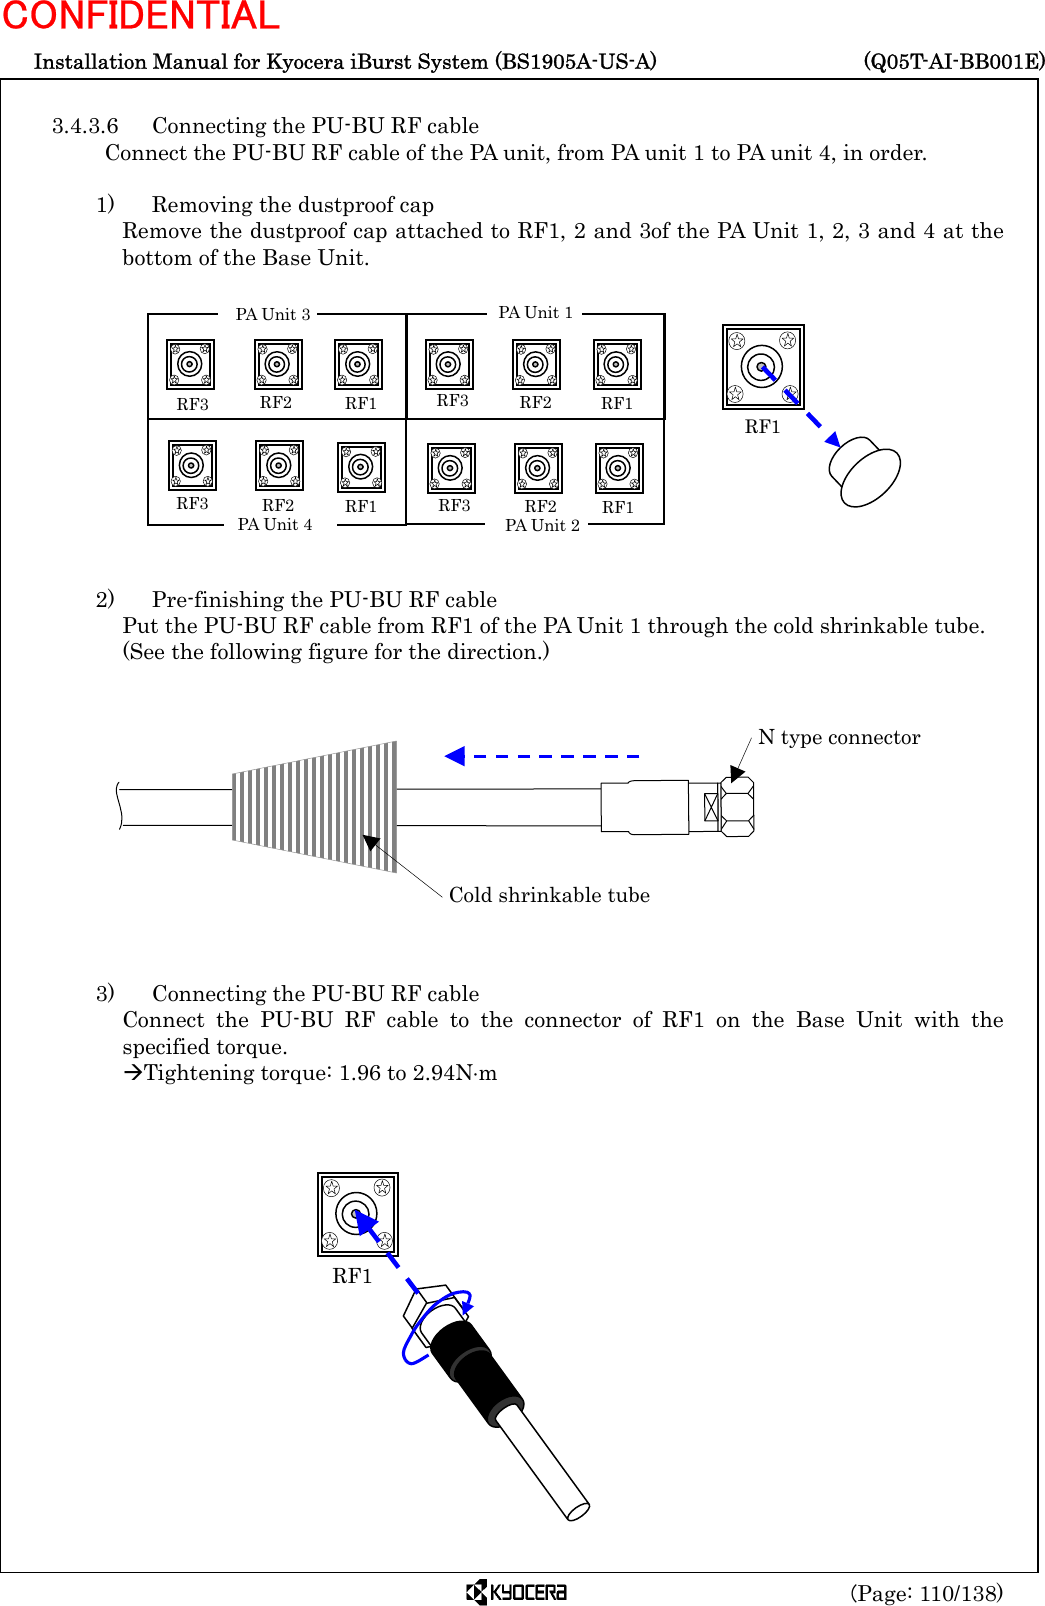  Installation Manual for Kyocera iBurst System (BS1905A-US-A)     (Q05T-AI-BB001E) (Page: 110/138) CONFIDENTIAL  3.4.3.6  Connecting the PU-BU RF cable Connect the PU-BU RF cable of the PA unit, from PA unit 1 to PA unit 4, in order.  1)    Removing the dustproof cap Remove the dustproof cap attached to RF1, 2 and 3of the PA Unit 1, 2, 3 and 4 at the bottom of the Base Unit.             2)    Pre-finishing the PU-BU RF cable Put the PU-BU RF cable from RF1 of the PA Unit 1 through the cold shrinkable tube.   (See the following figure for the direction.)             3)    Connecting the PU-BU RF cable Connect the PU-BU RF cable to the connector of RF1 on the Base Unit with the specified torque. ÆTightening torque: 1.96 to 2.94N⋅m               RF1  Cold shrinkable tube N type connector  RF1 RF2RF3 RF1    RF2 RF3 RF1   RF2RF3RF1RF2RF3PA Unit 3 PA Unit 4PA Unit 1 PA Unit 2 RF1 